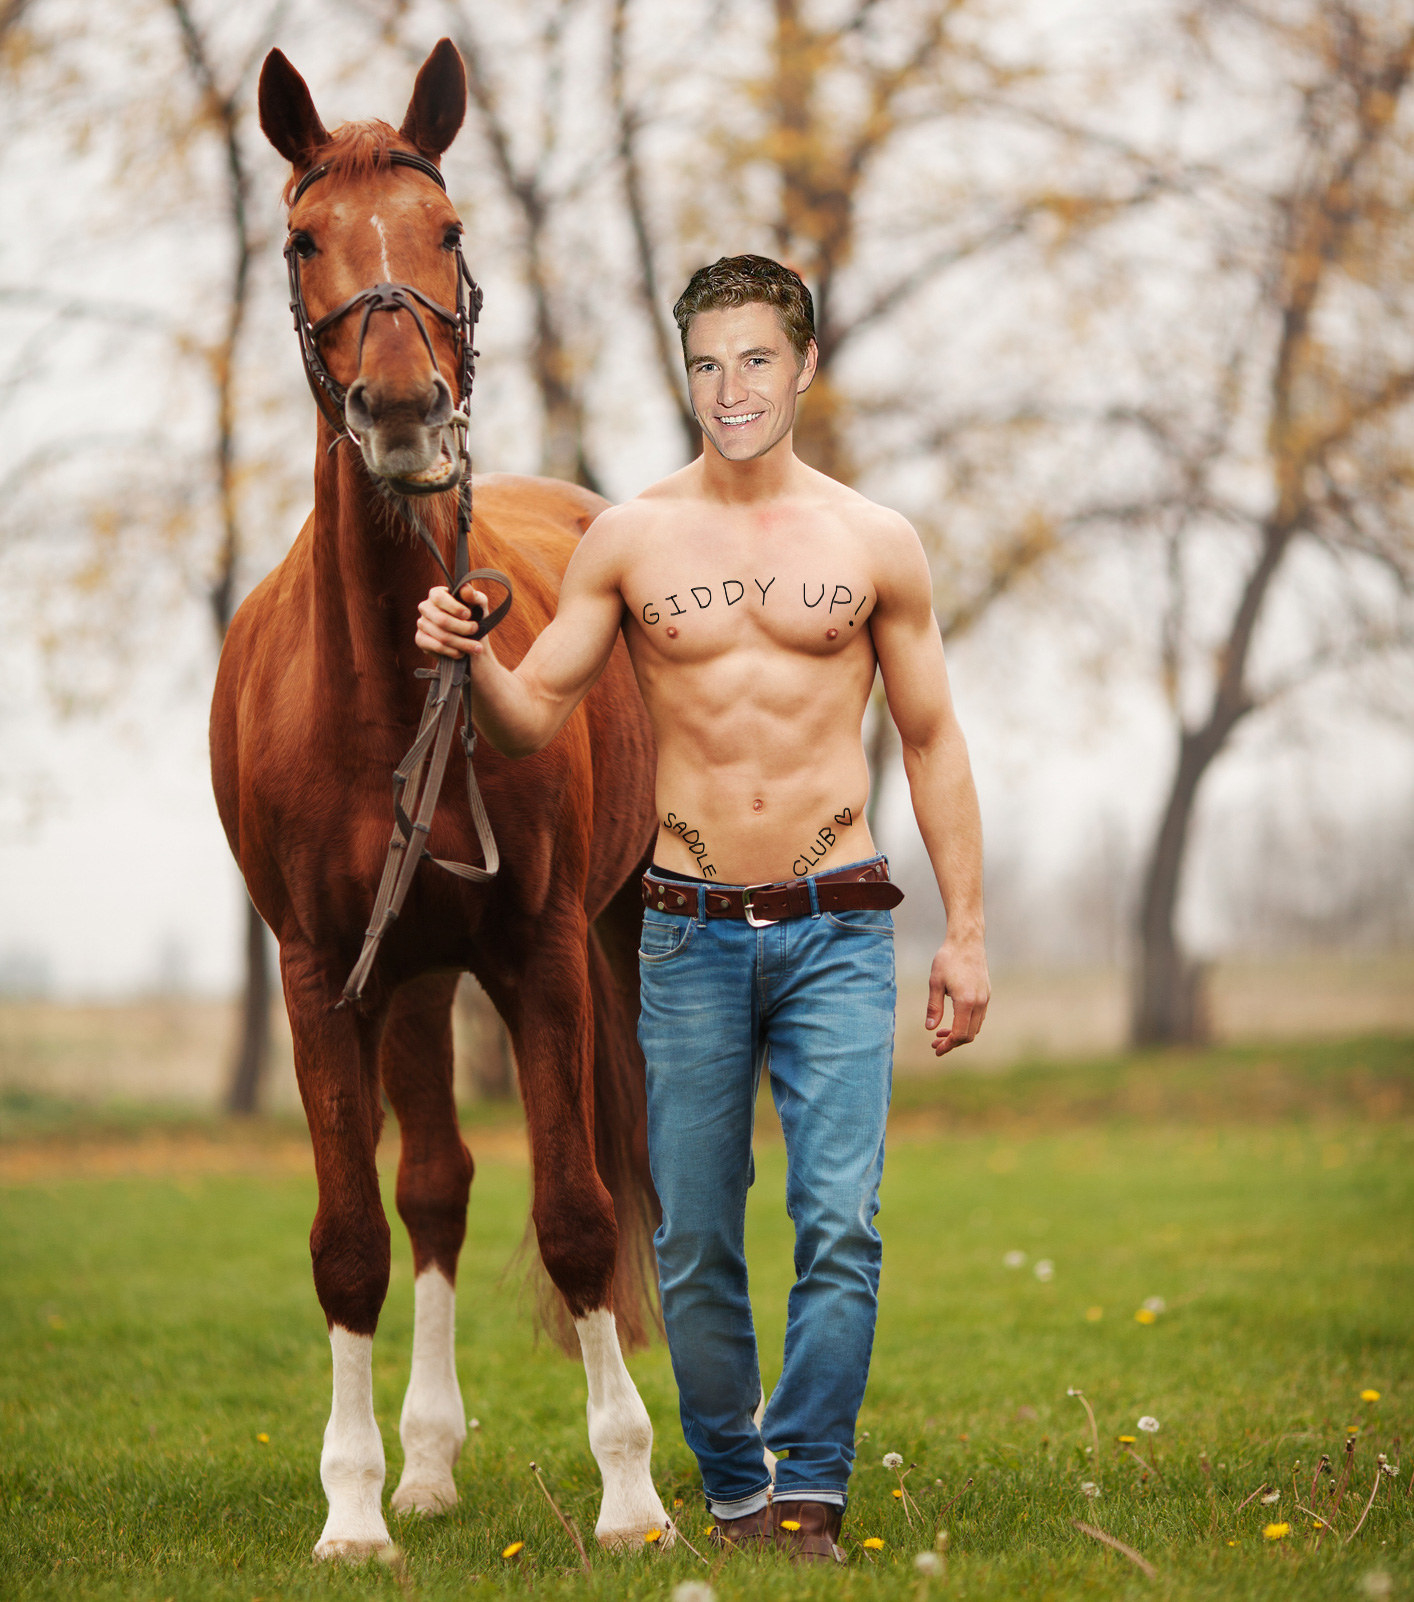 Max From The Saddle Club Was My Sexual Awakening